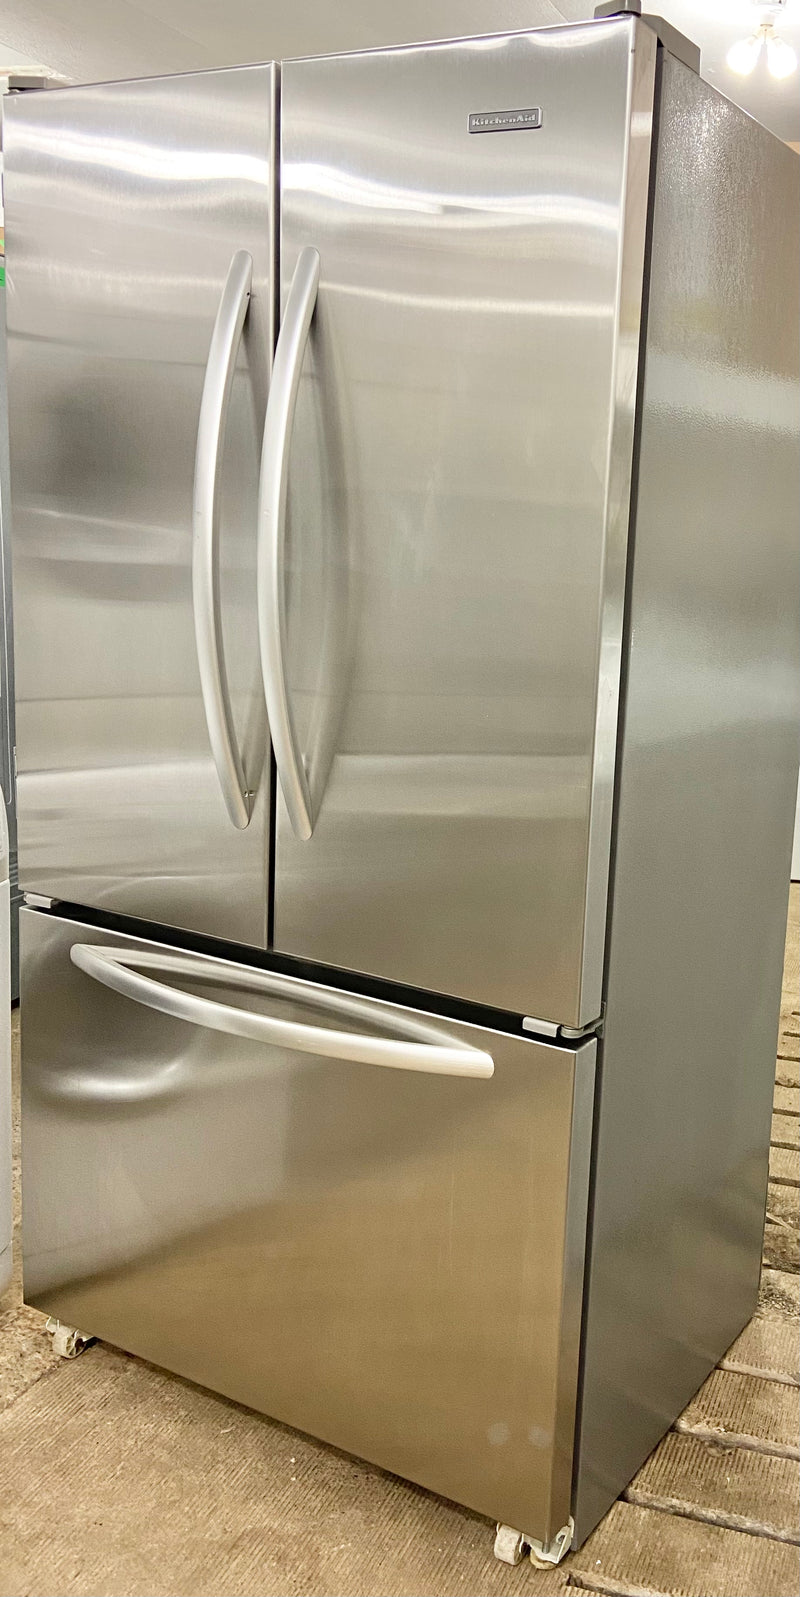 KitchenAid 36'' Wide Stainless Steel French Door Fridge with Water and Ice Maker, Free 60 Day Warranty